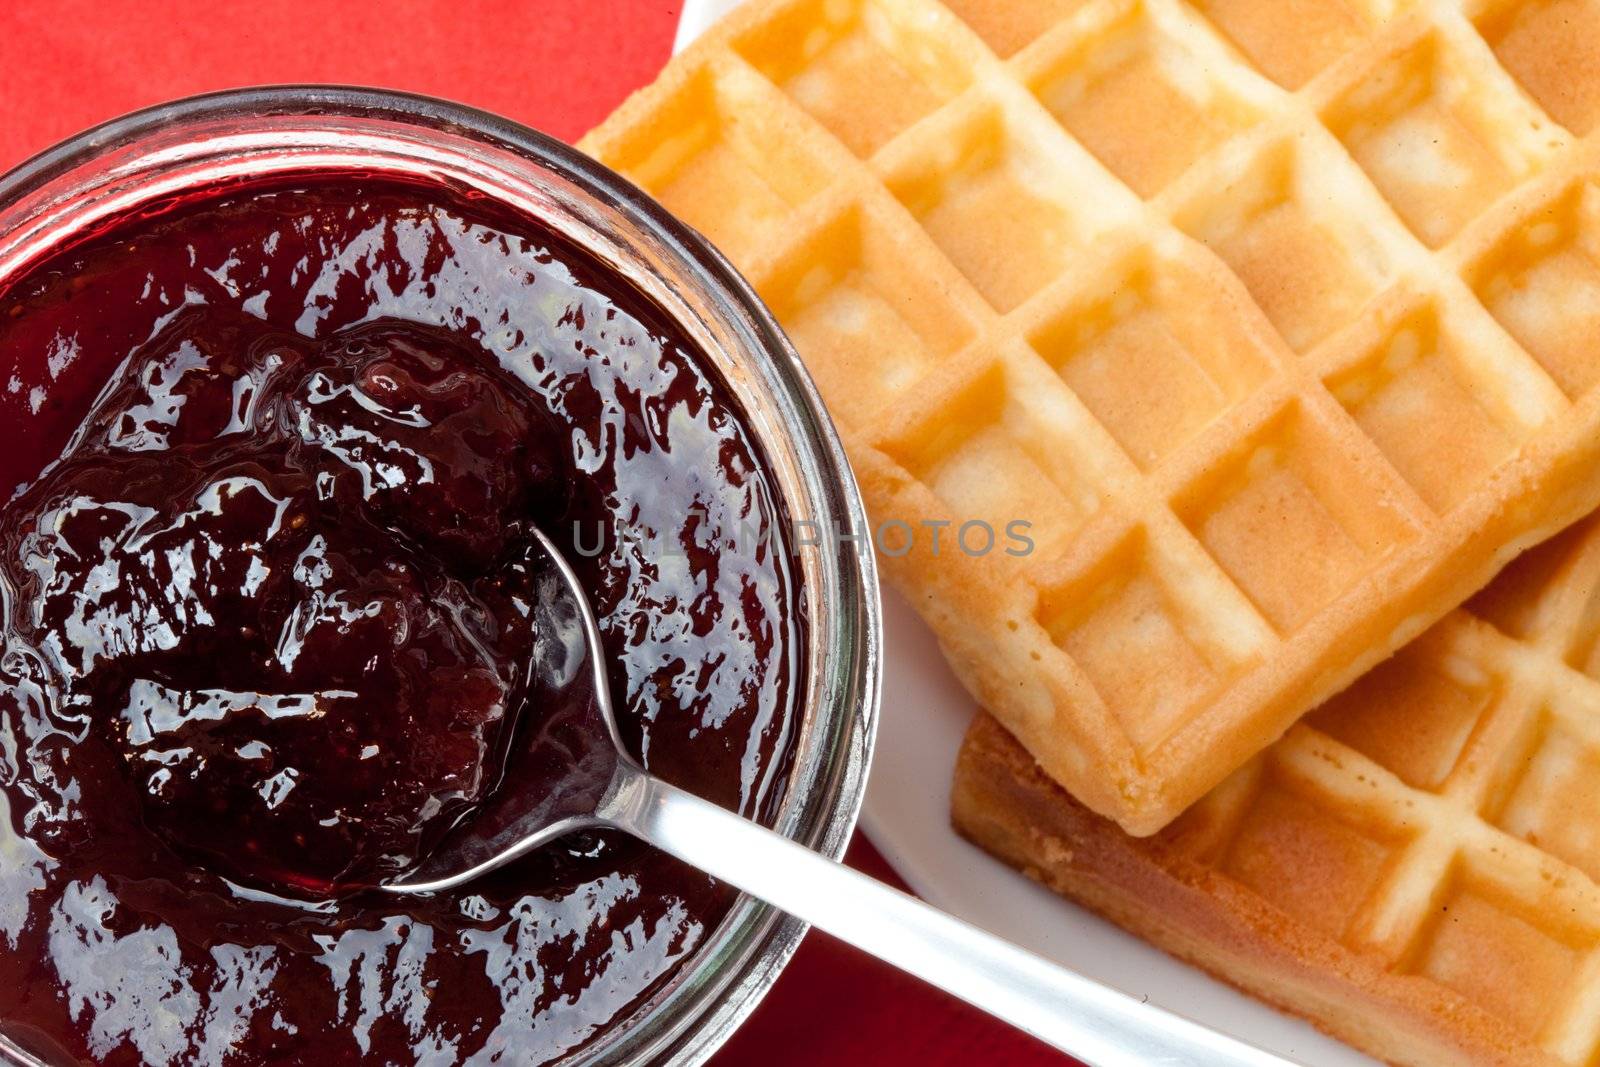 Breakfast with waffles and jam on the table